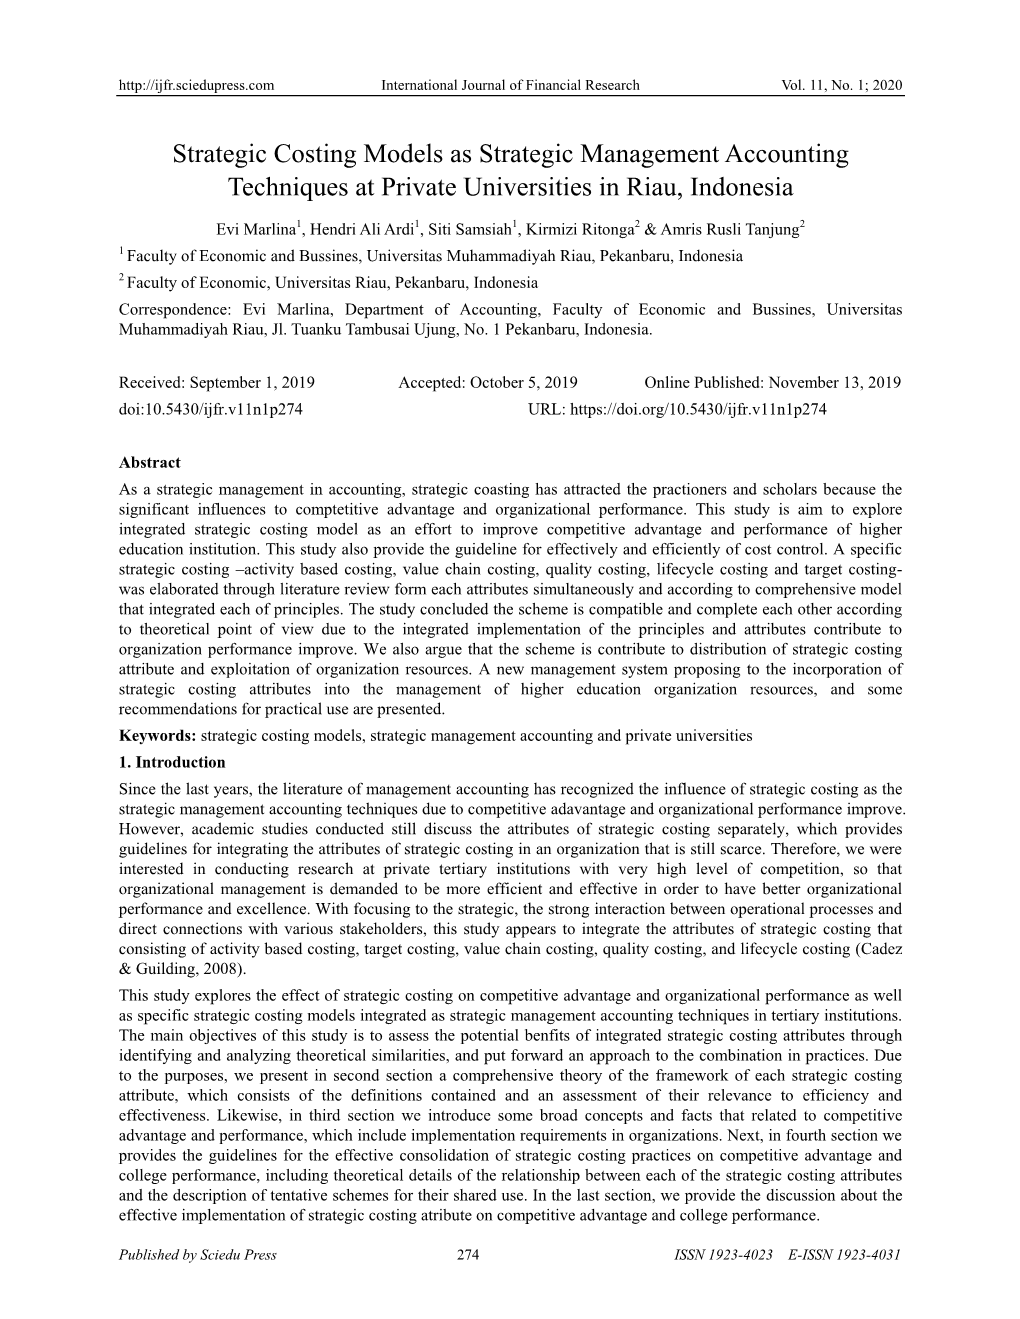 Strategic Costing Models As Strategic Management Accounting Techniques at Private Universities in Riau, Indonesia